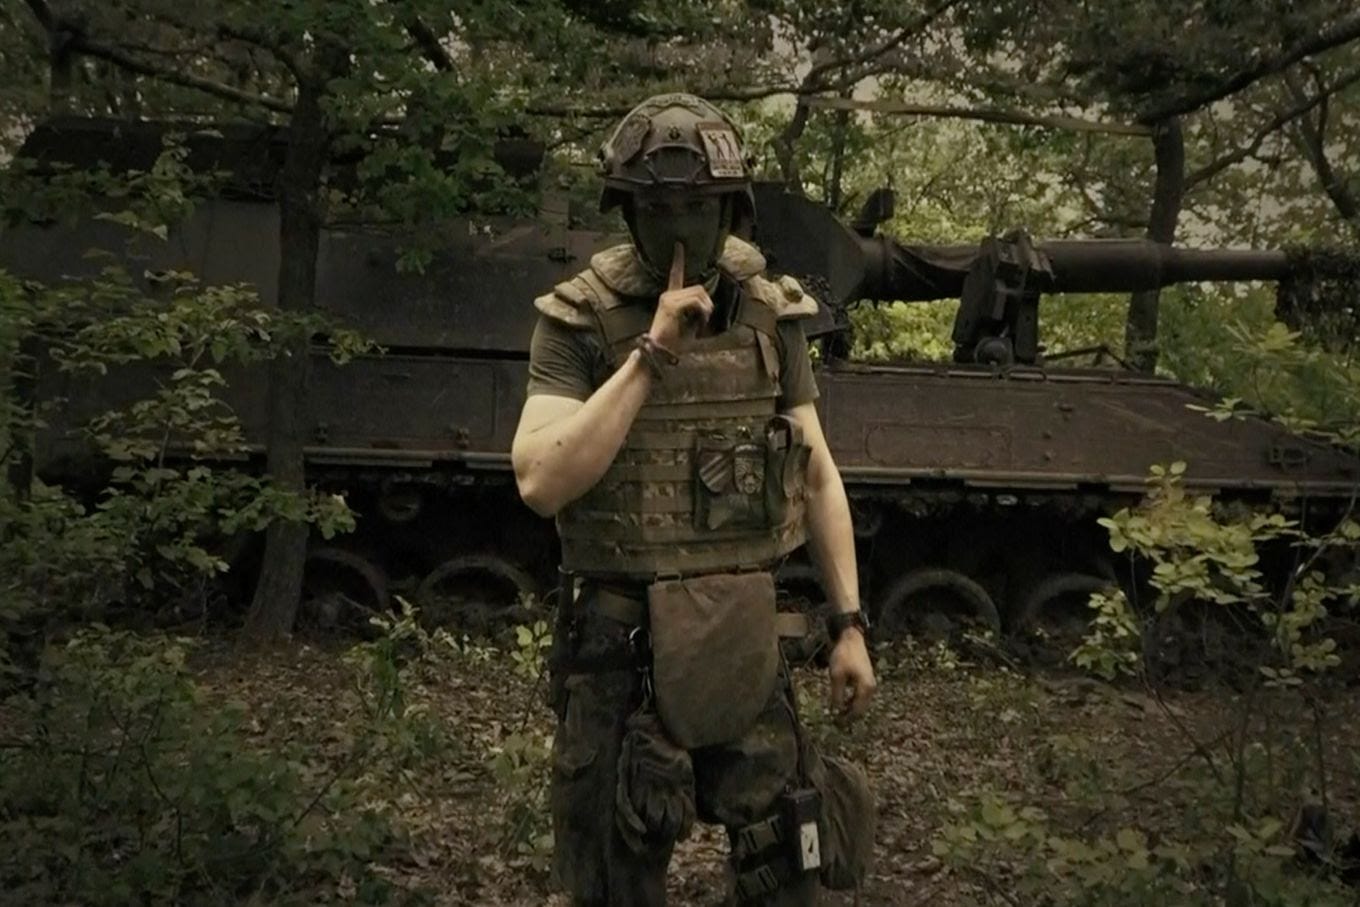 In an image from video provided by the Ukrainian Defense Ministry on June 4, a soldier poses with a finger to his lips in an undisclosed location in Ukraine. (Ukrainian Defense Ministry/AP)